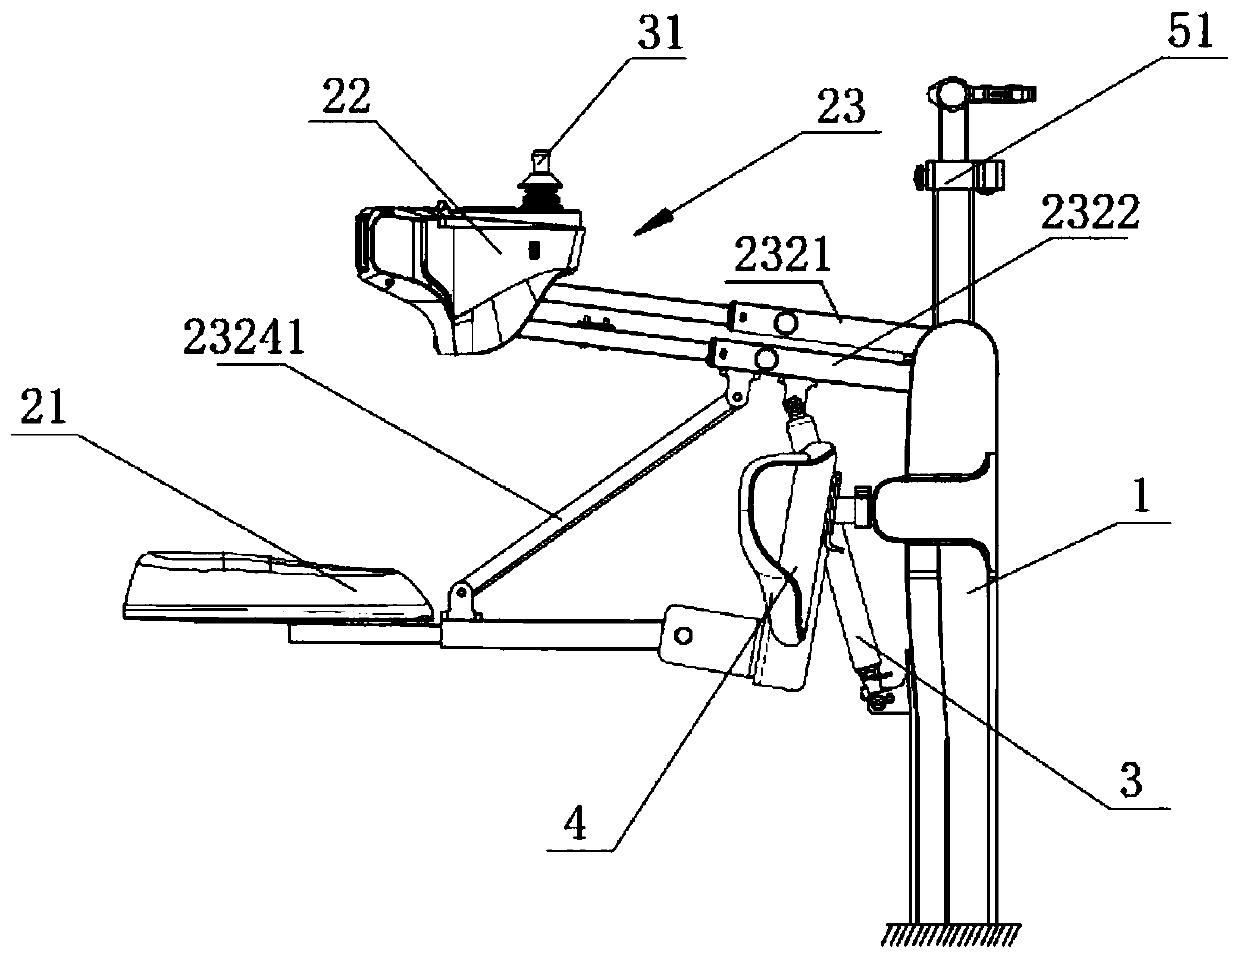 Wearing-free auxiliary standing device